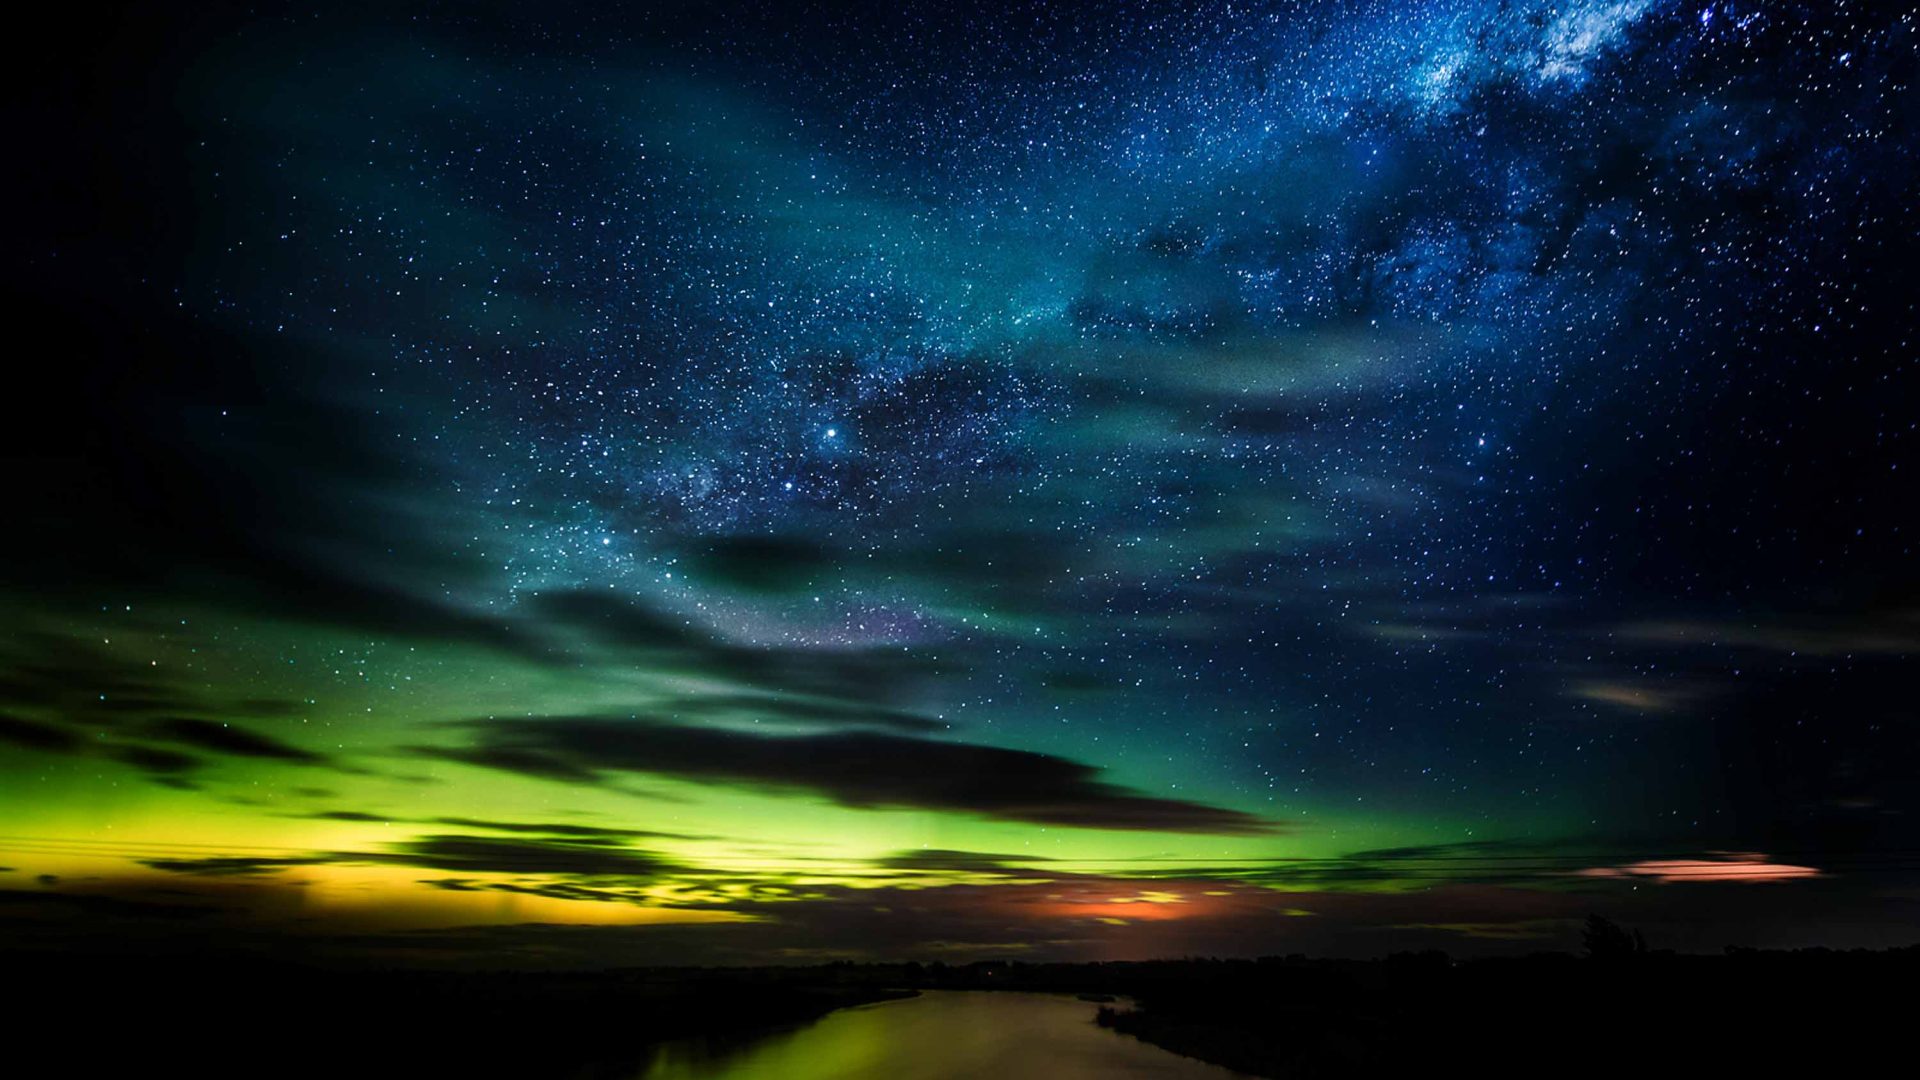 Blue and green star studded sky above a lake.